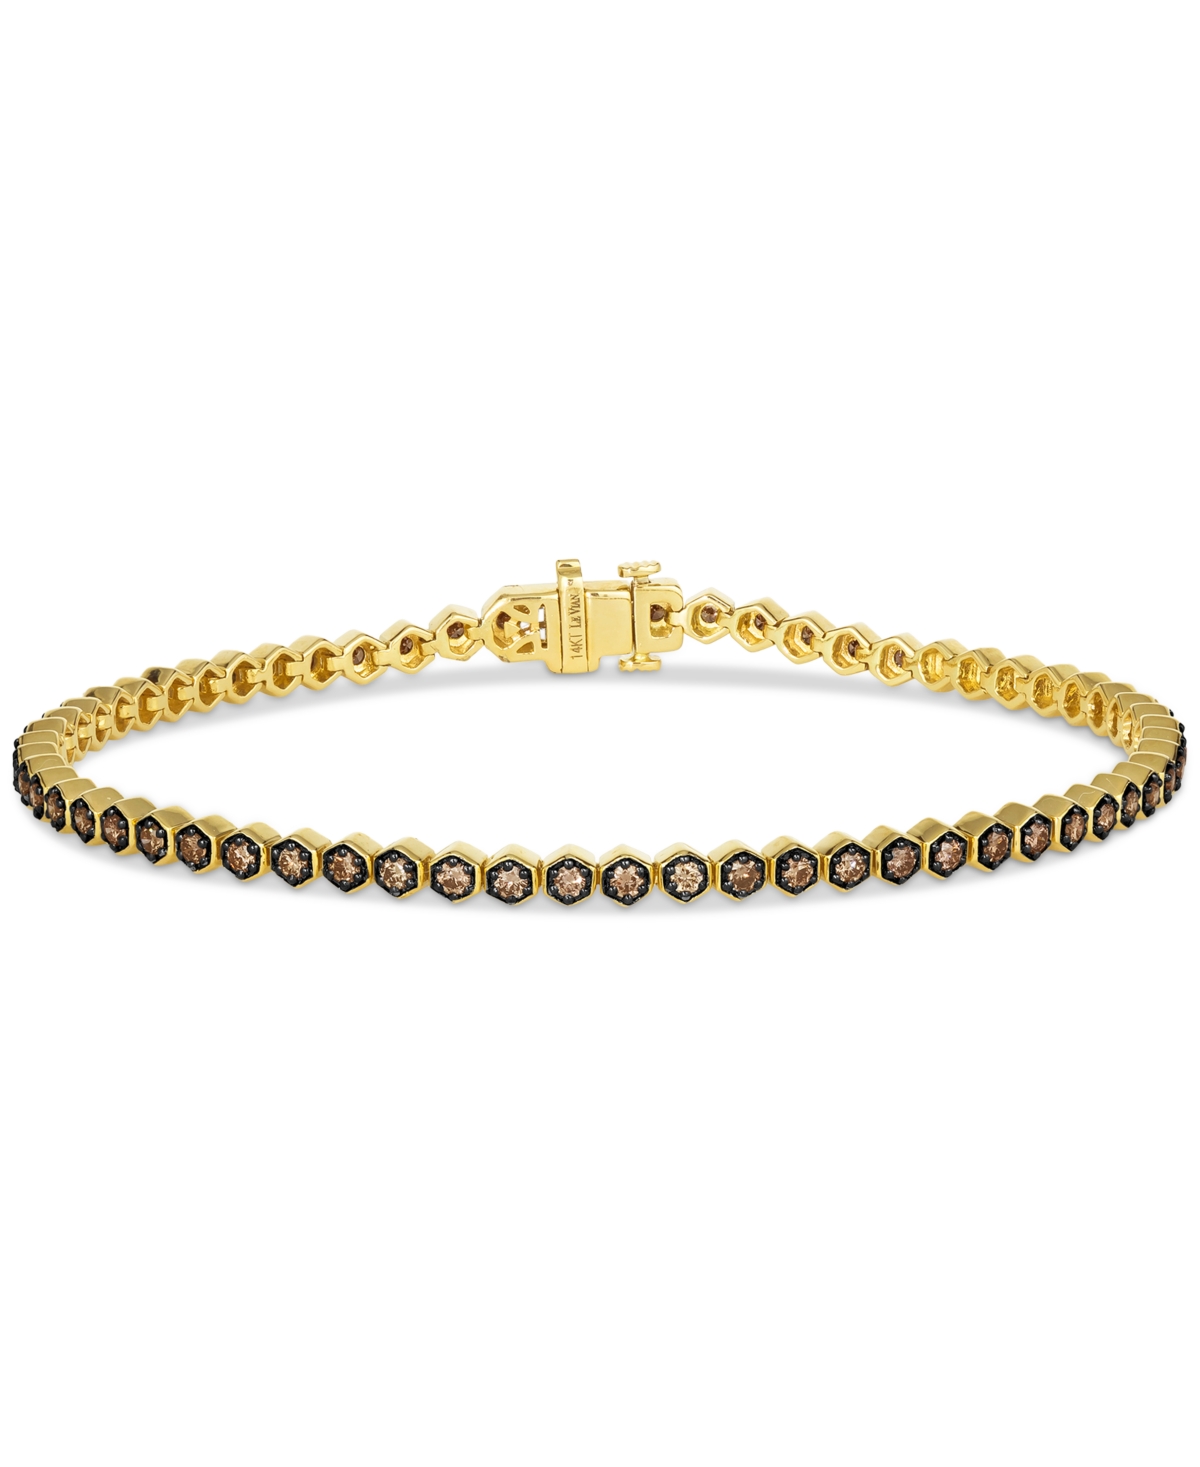 Chocolatier Chocolate Diamond Tennis Bracelet (1-1/6 ct. t.w.) in 14k Gold (Also Available in Rose Gold) - Rose Gold